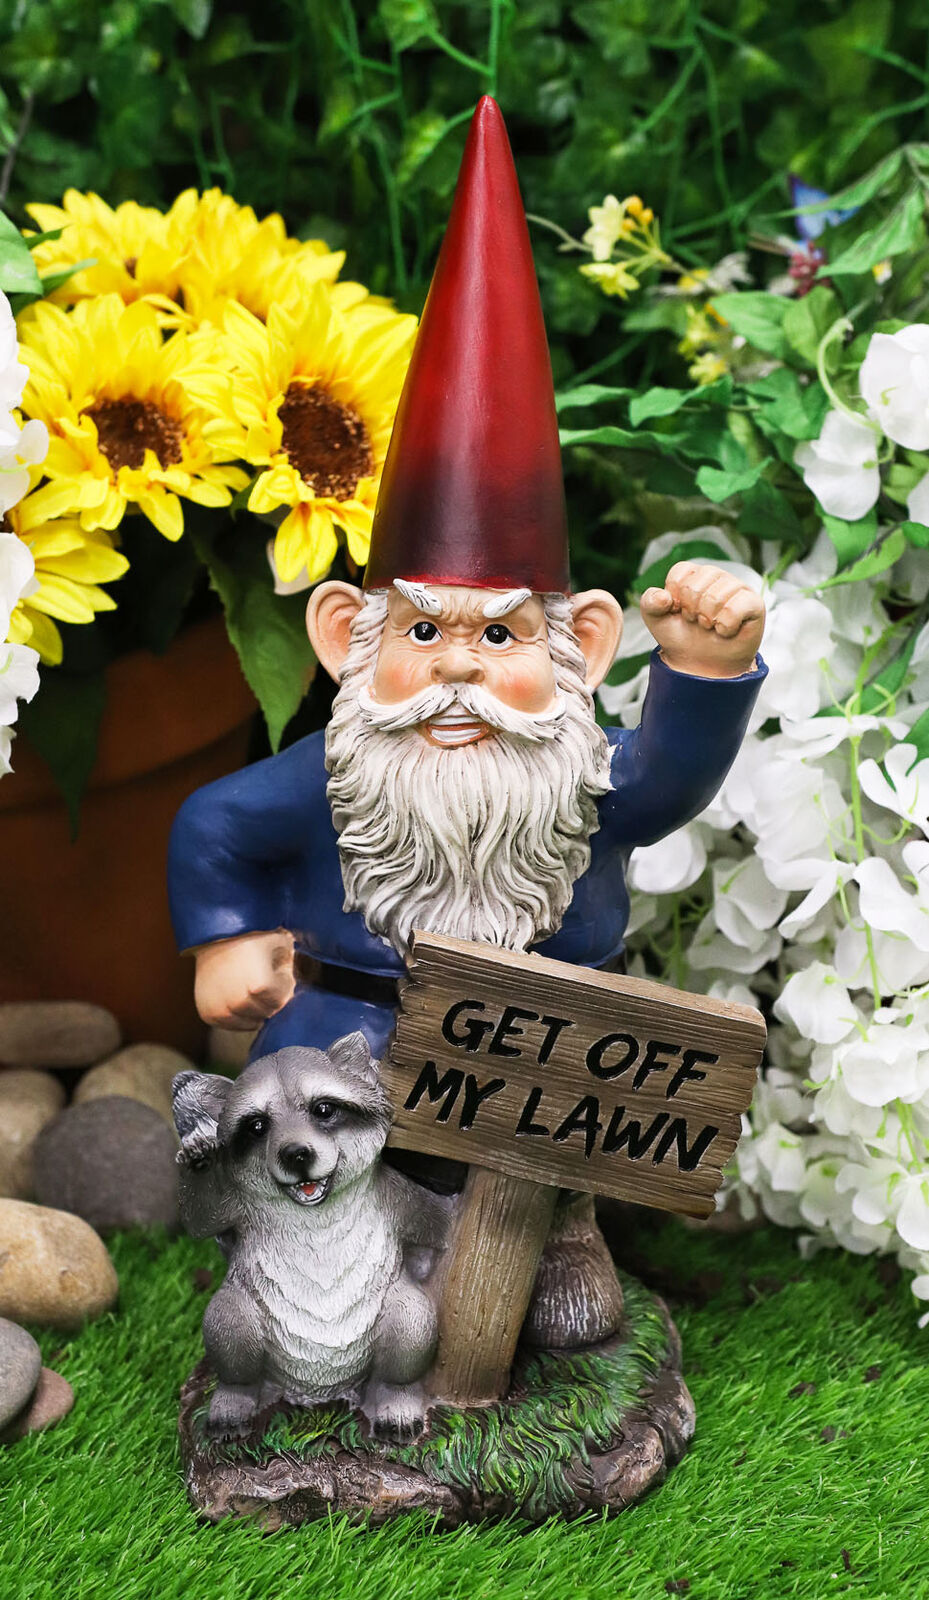 Ebros Grumpy Mr Gnome Dwarf With Feisty Raccoon Raising Fists Not Welcome Statue